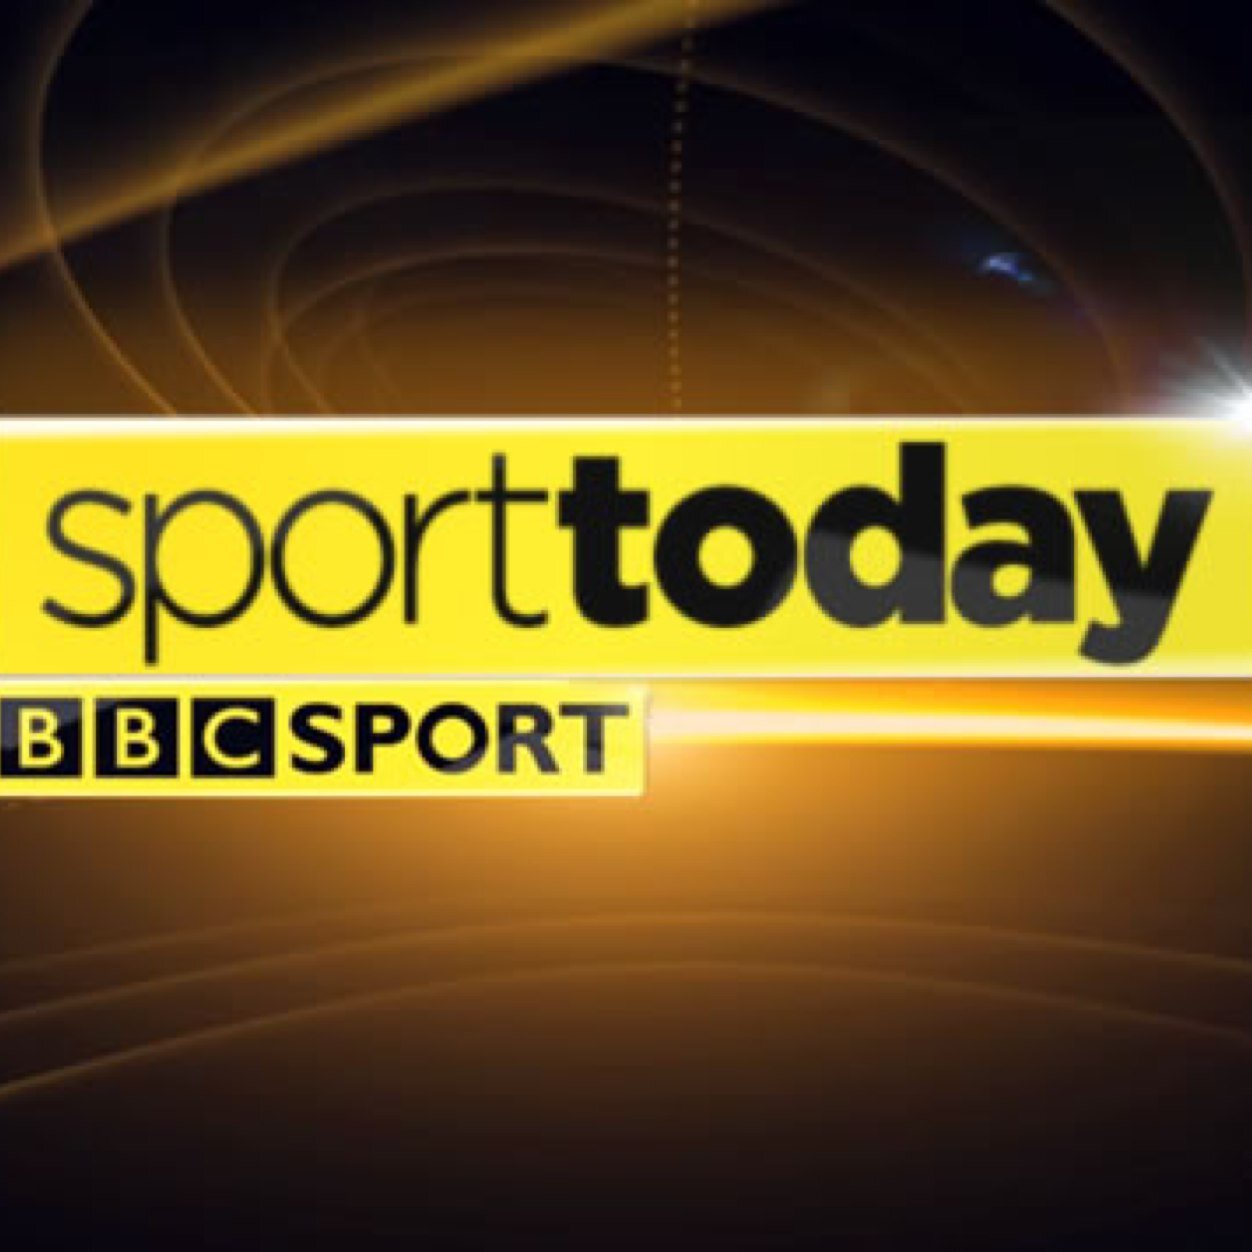  Sport  Today  BBCSportToday Twitter